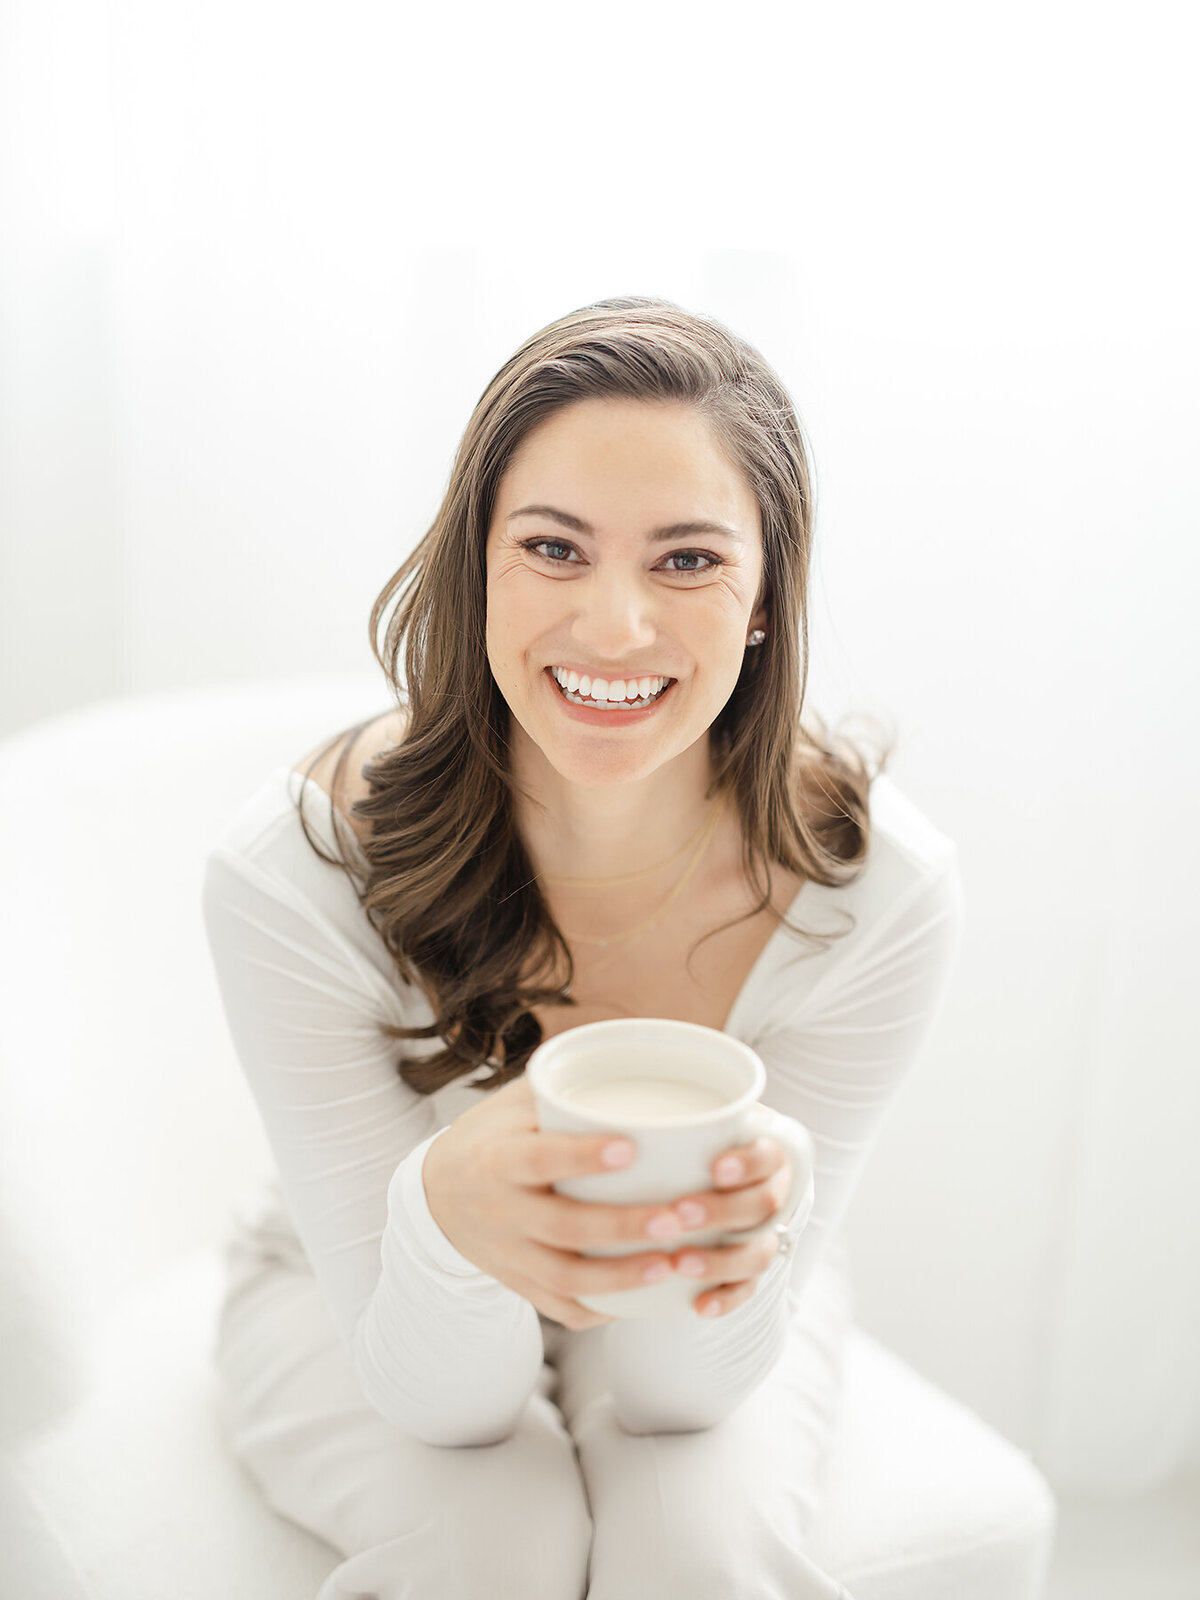 DFW business owner professional headshot of her sitting down holding a coffee mug smiling at the camera.